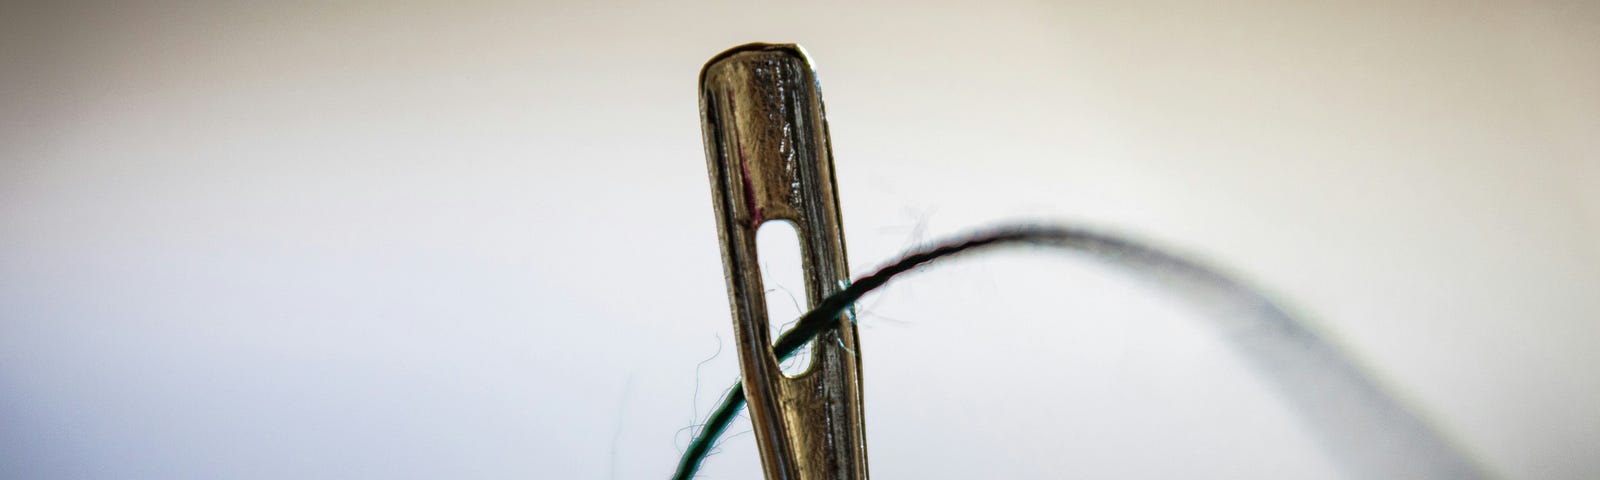 Closeup photo of the eye of a needle, with thread going through